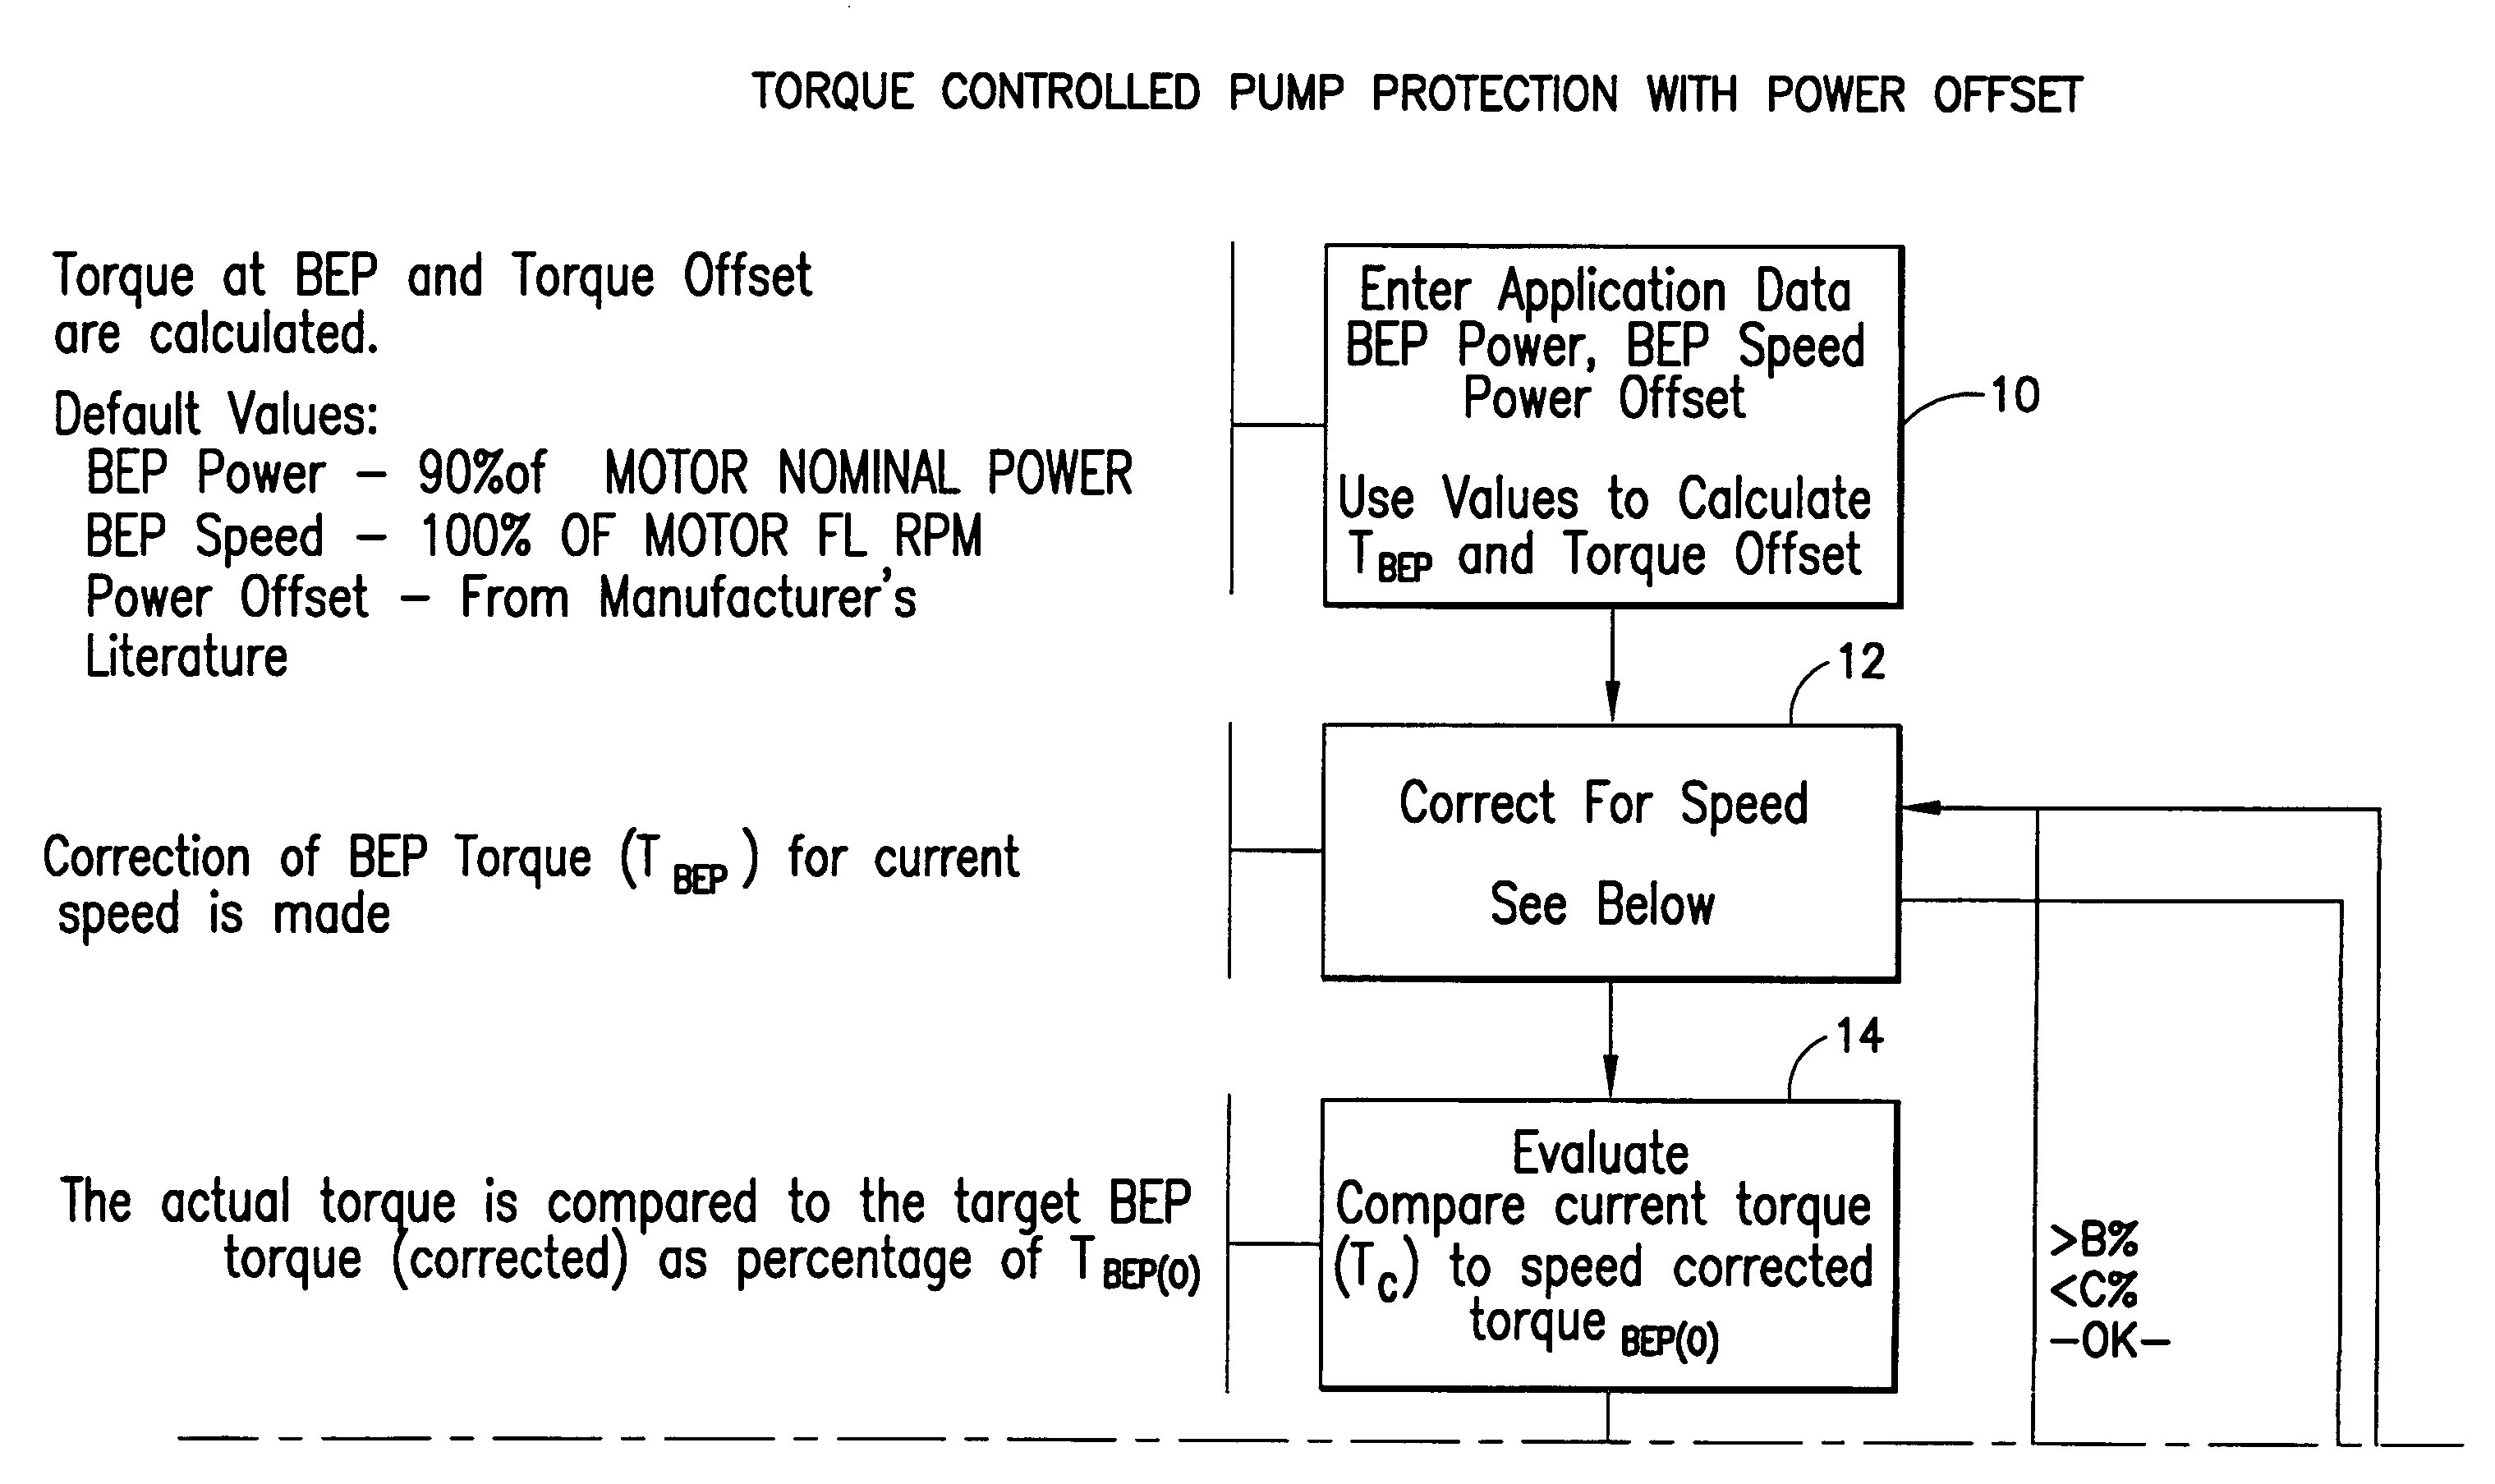 Torque controlled pump protection with mechanical loss compensation